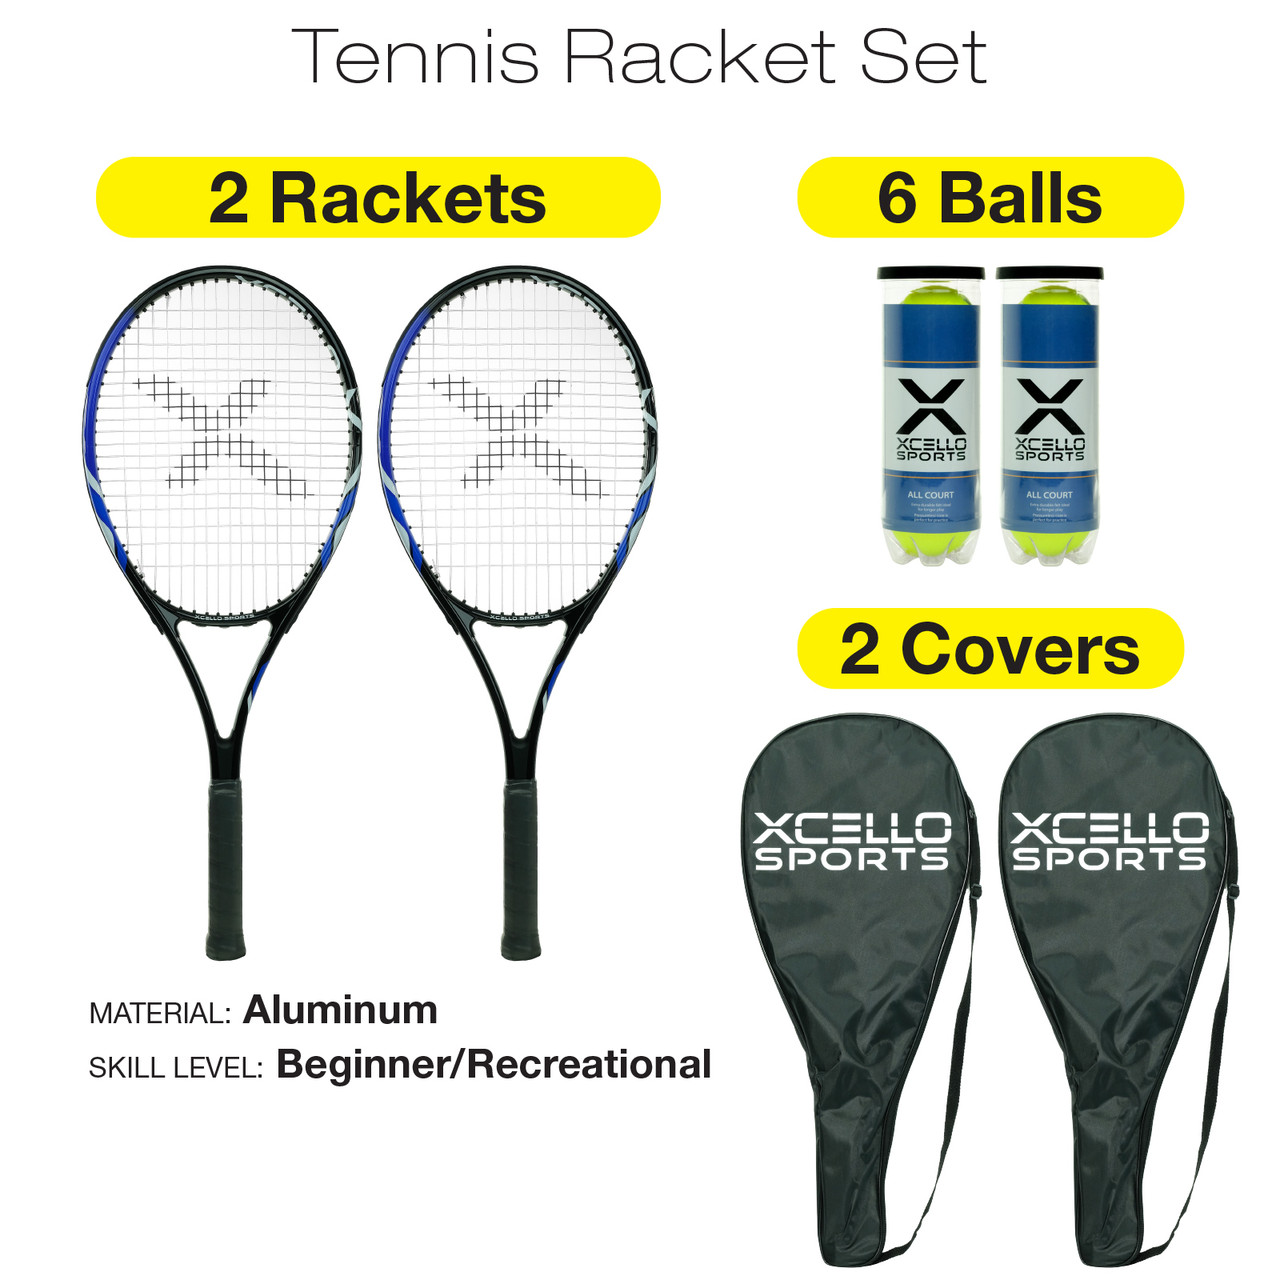 Xcello Sports 2-Player Aluminum Tennis Racket Set - Includes Two Rackets. Six All Court Balls, and Carry Cases - 23" or 27" - Excello Global Brands